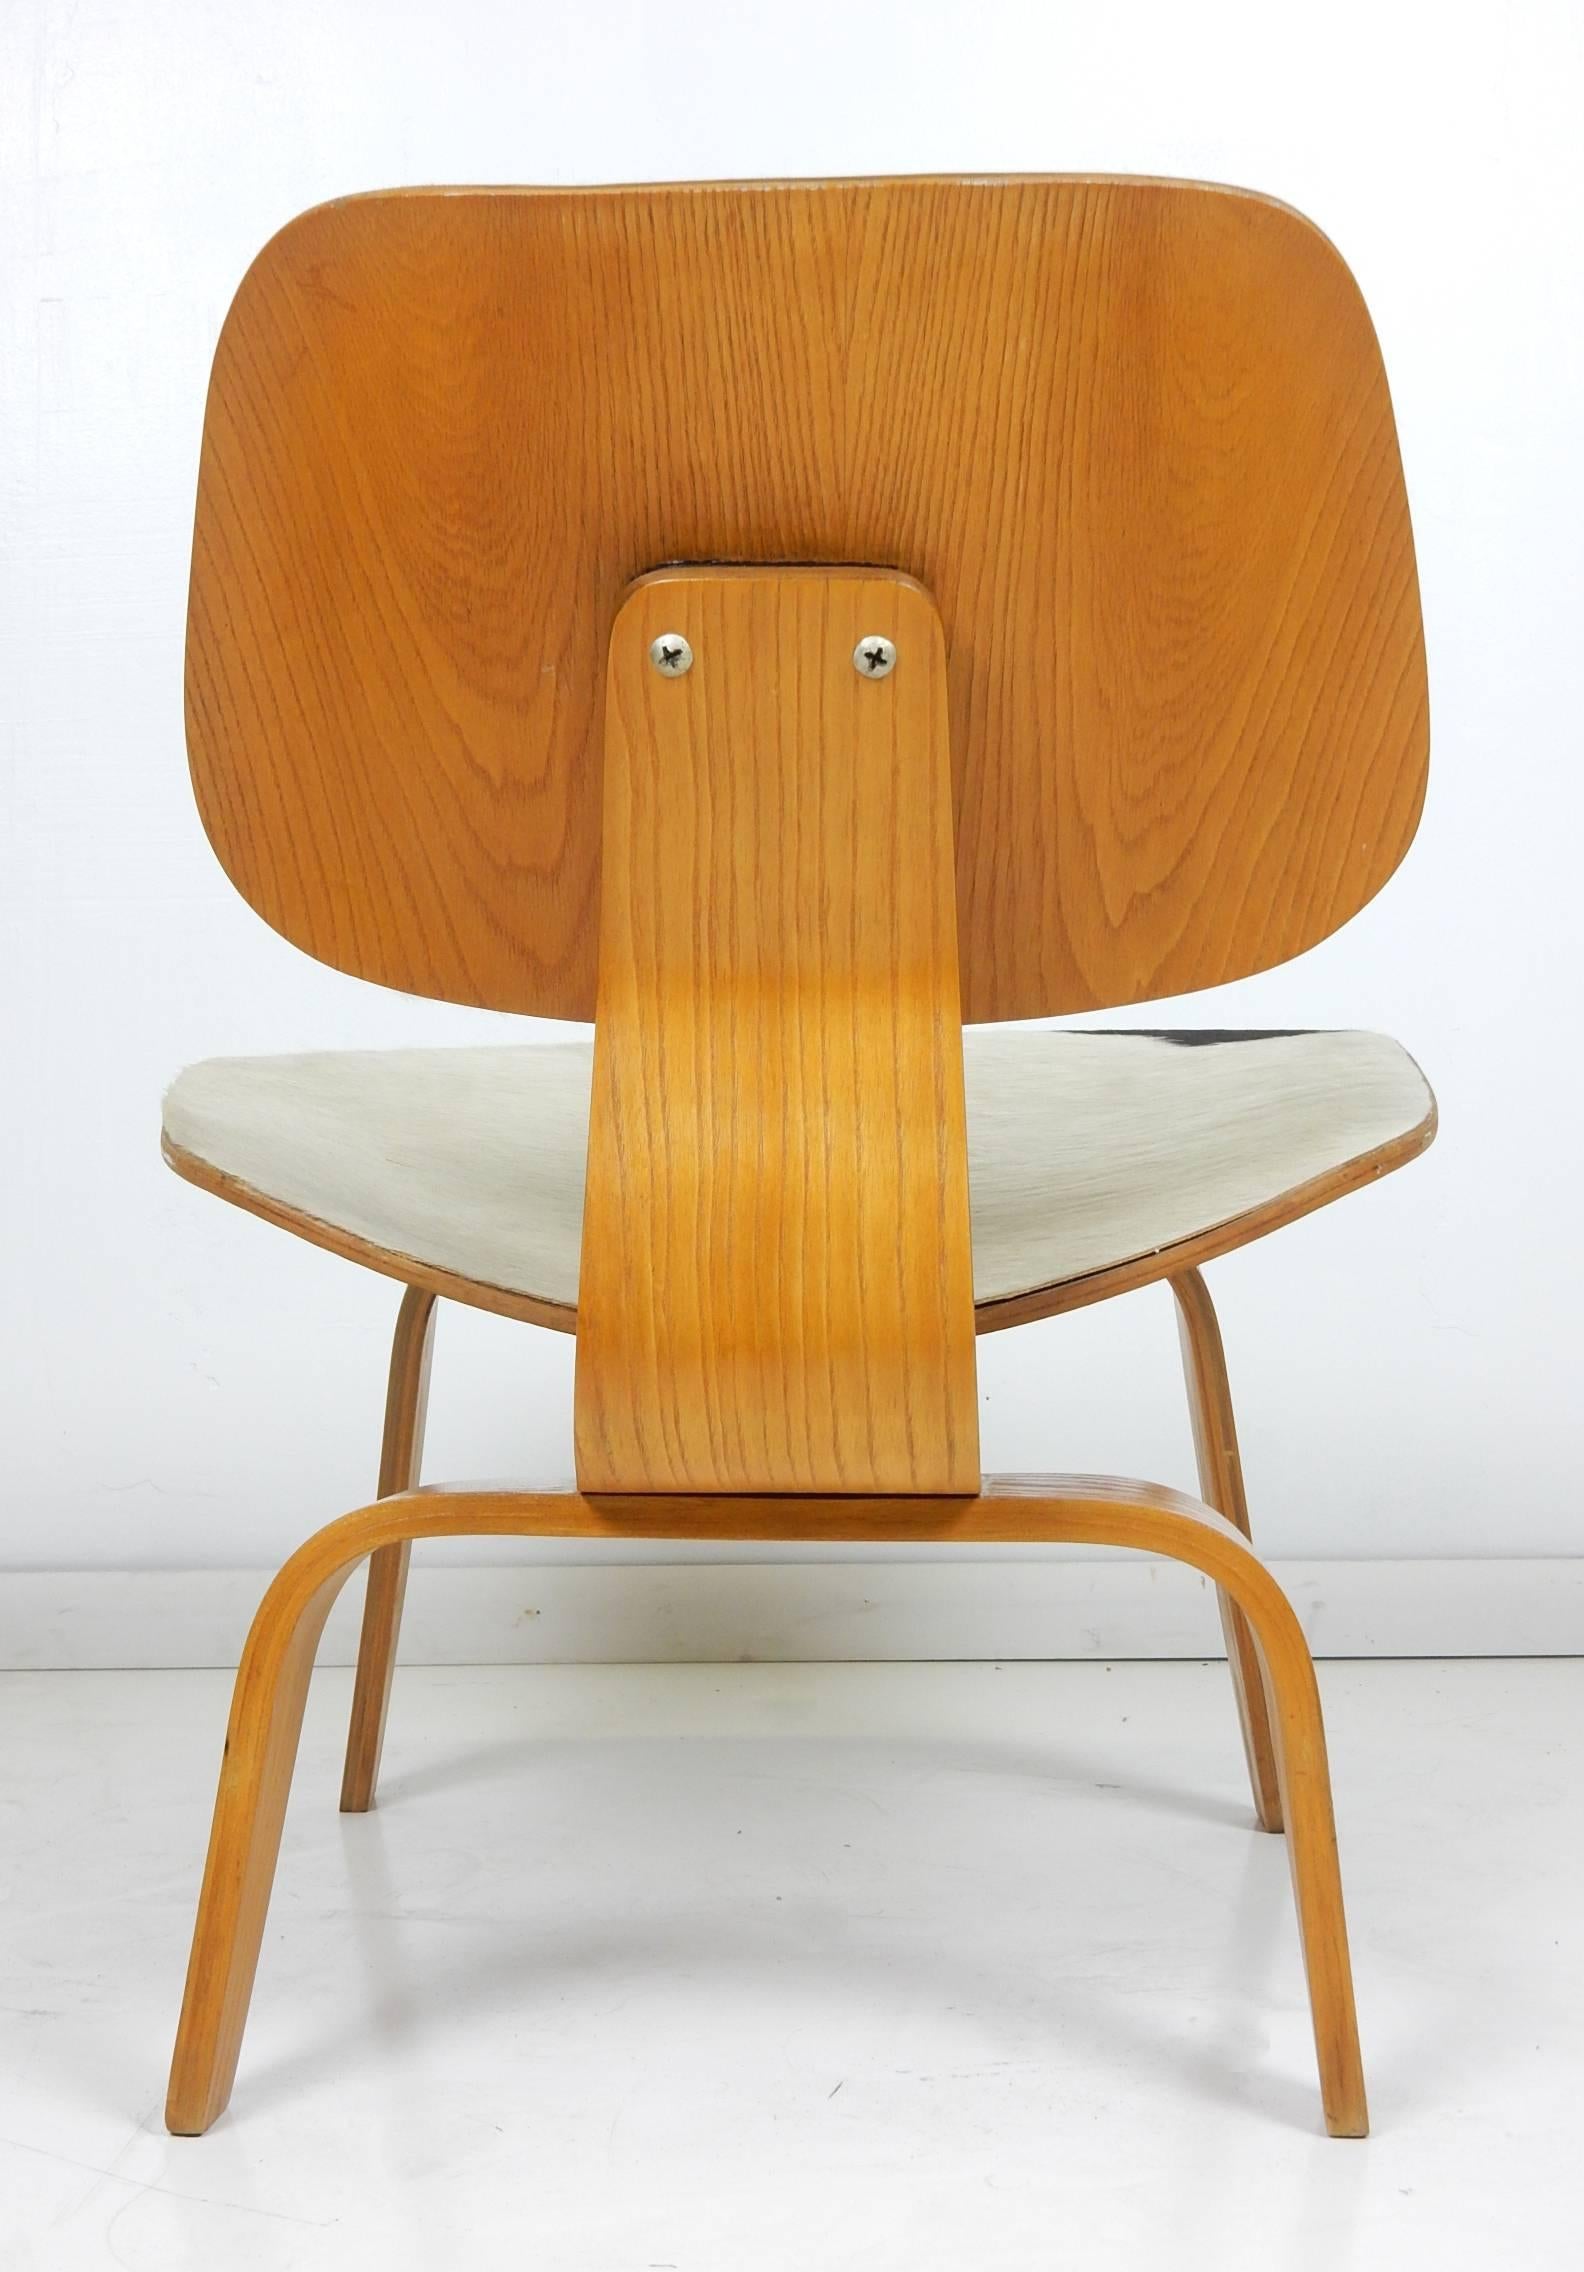 Mid-20th Century Charles and Ray Eames LCW Chair in Slunkskin by Evans Products for Herman Miller